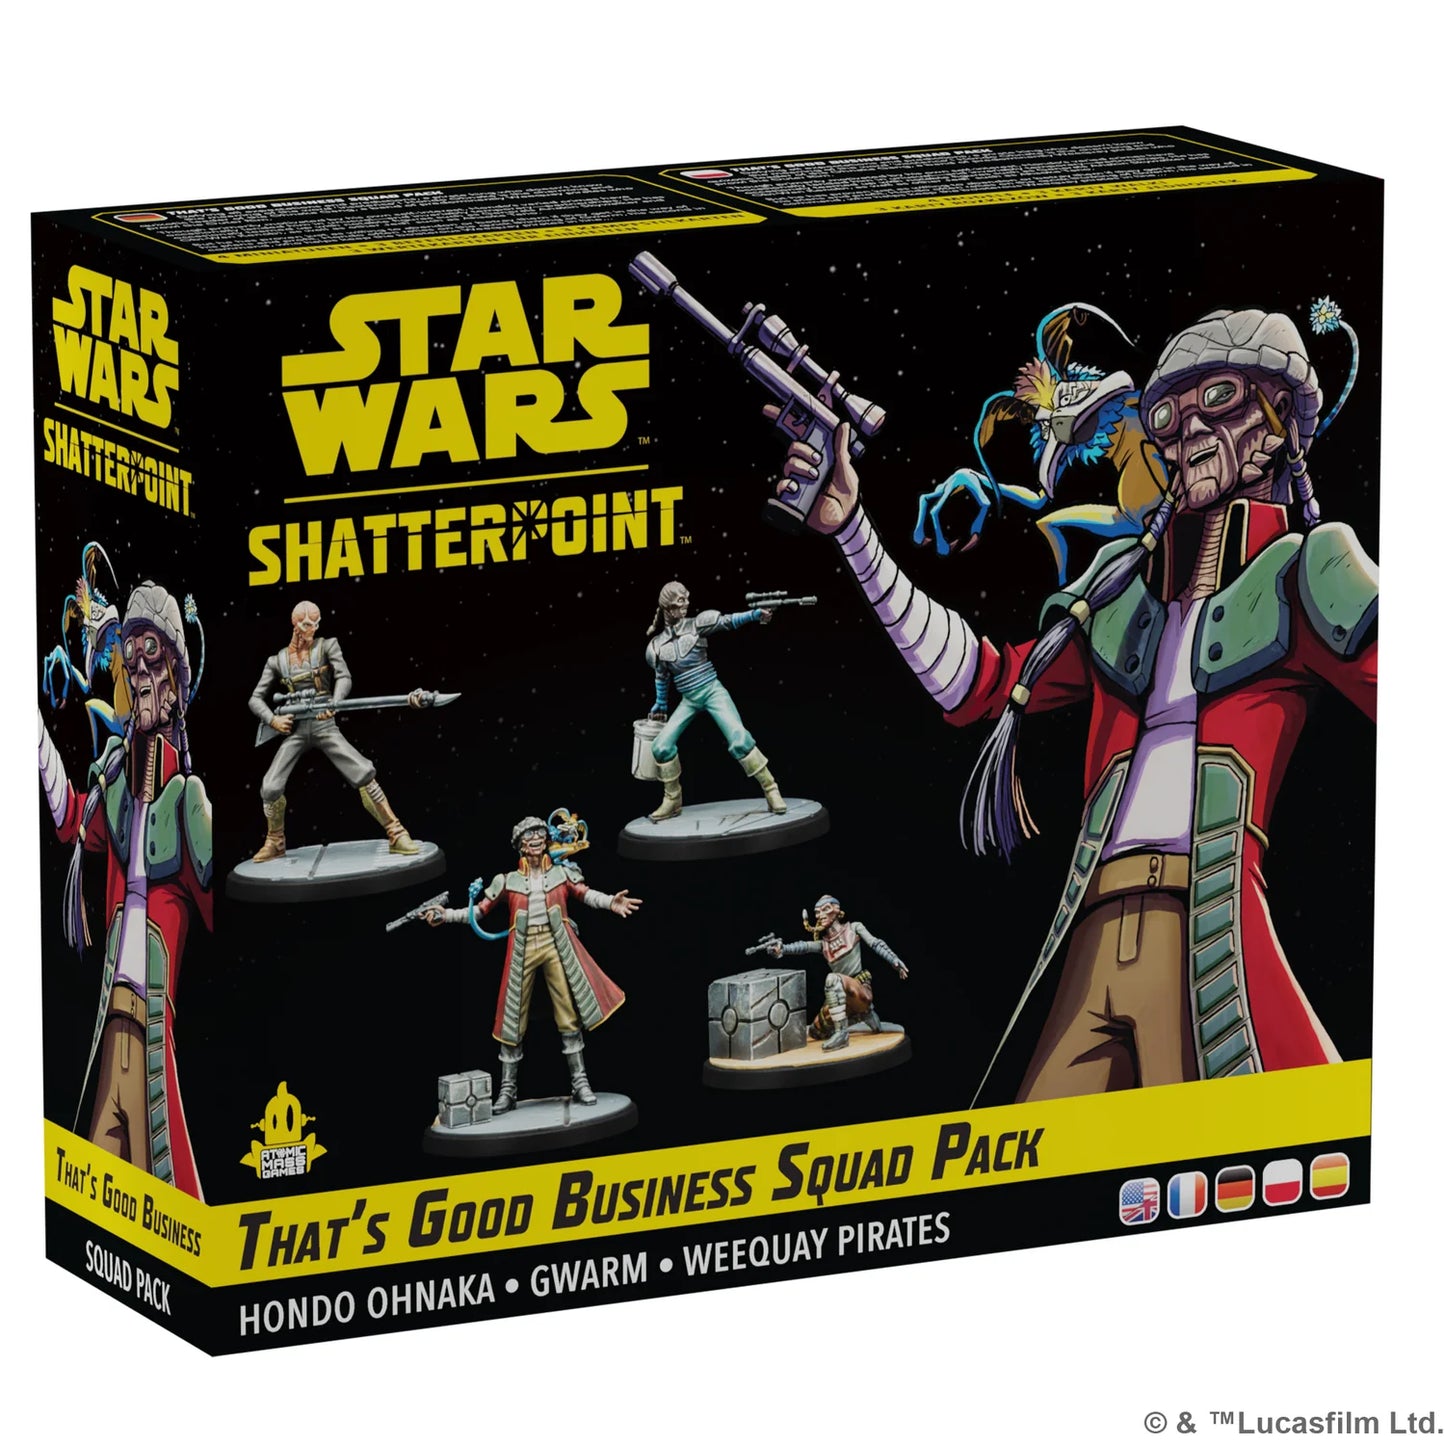 Star Wars: Shatterpoint - "That's Good Business" Squad Pack